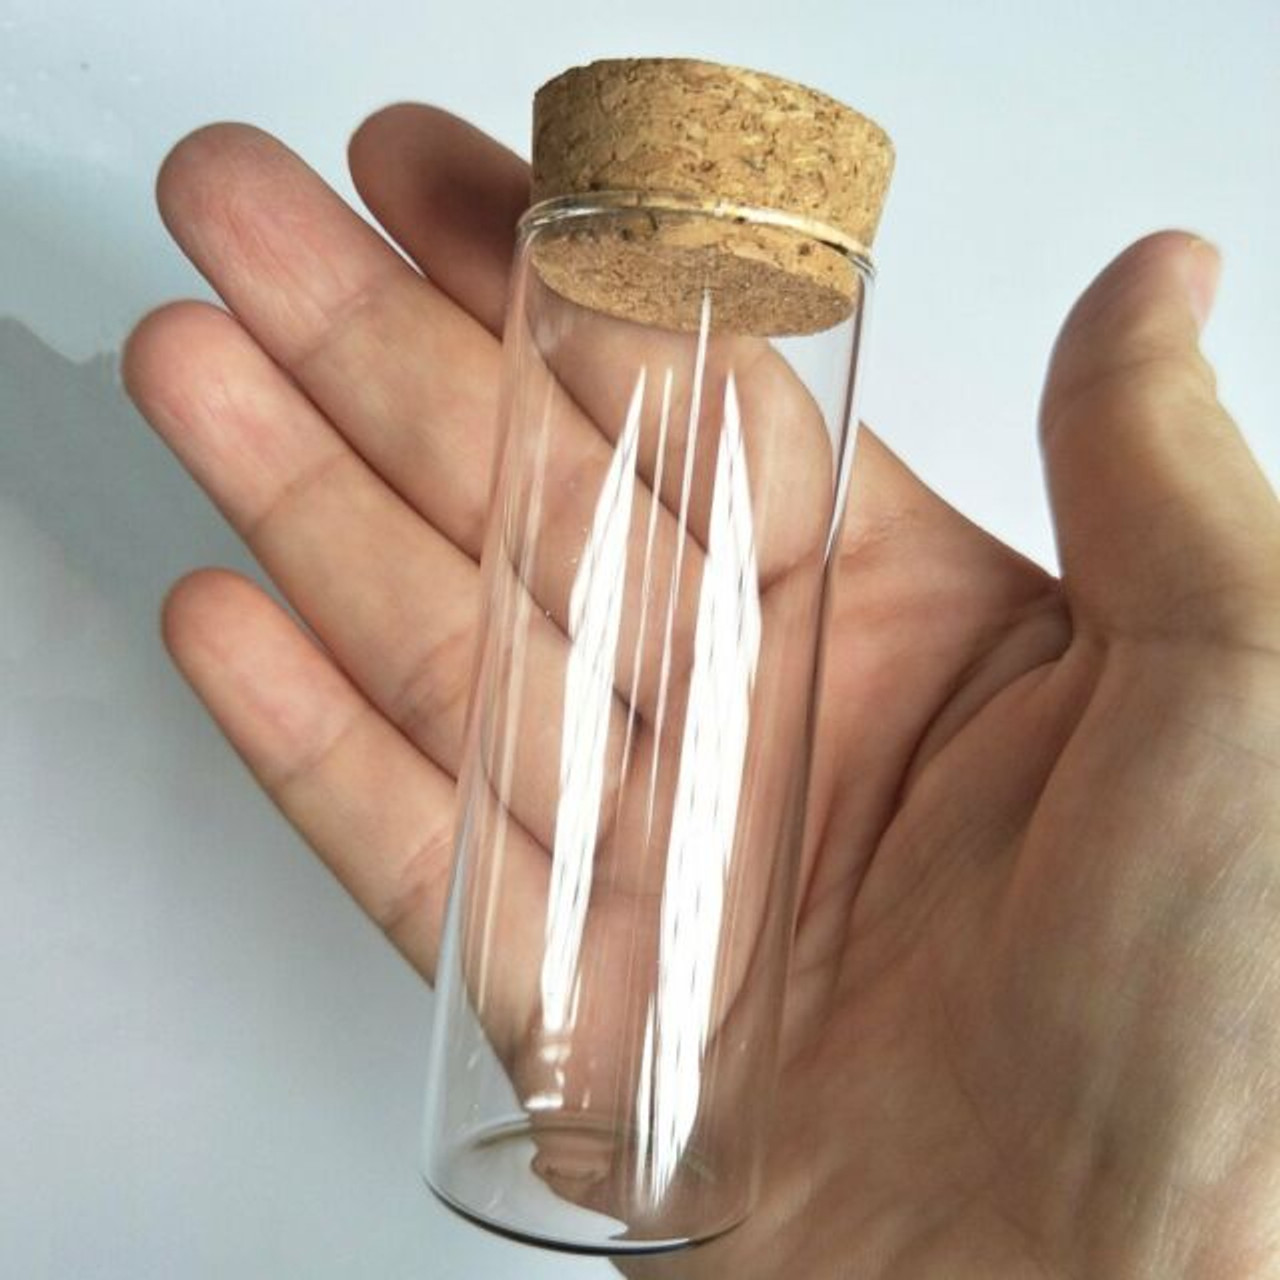 small glass test tubes